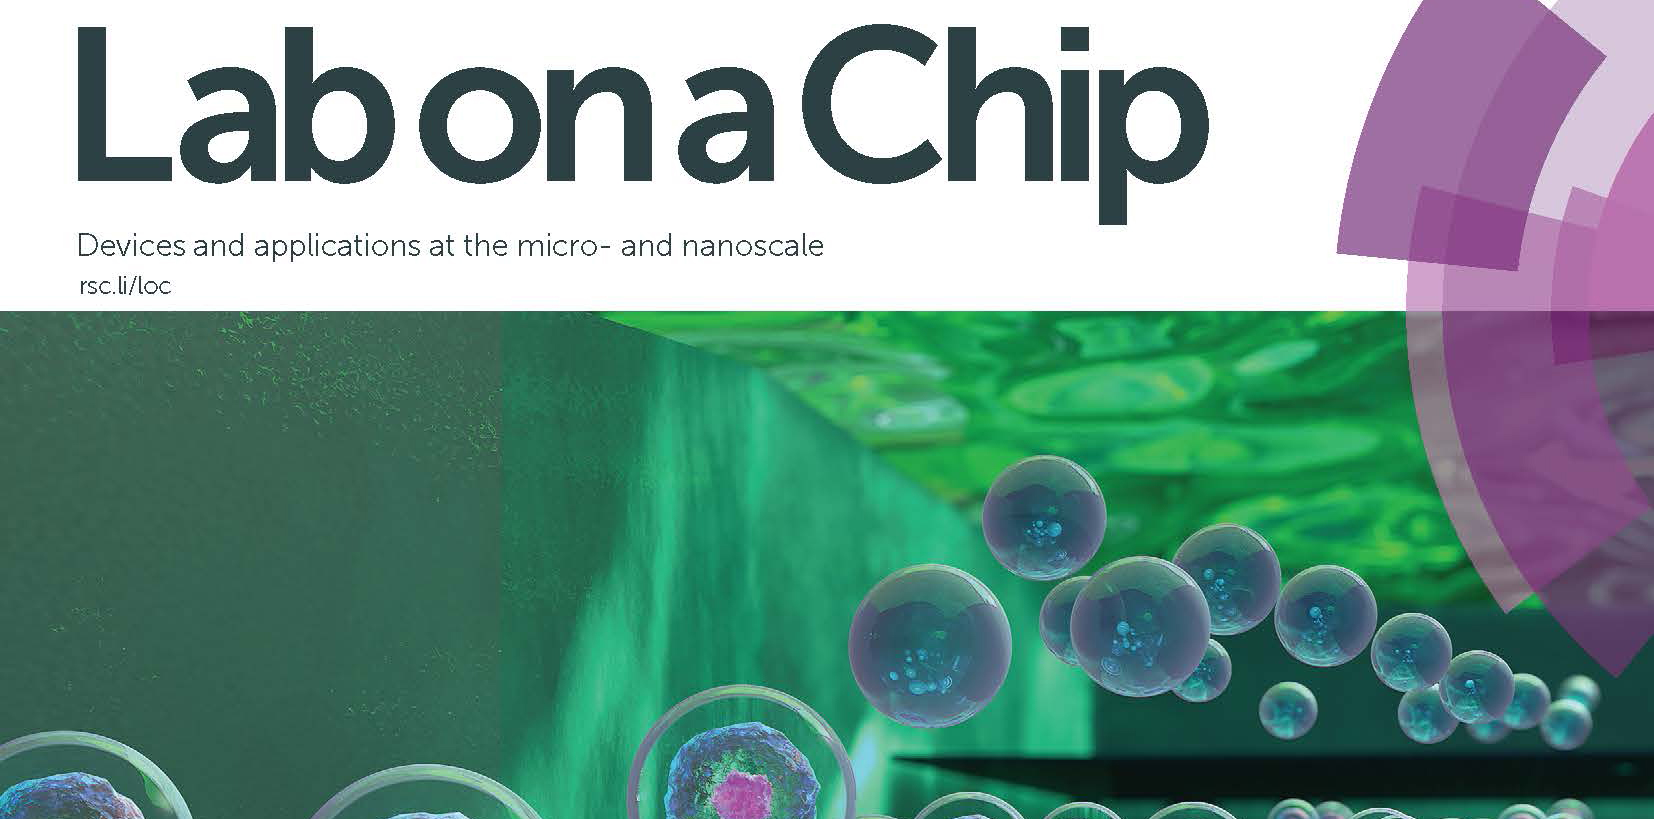 2018 cover article in Lab on a Chip describing diamagnetic droplet sorting.